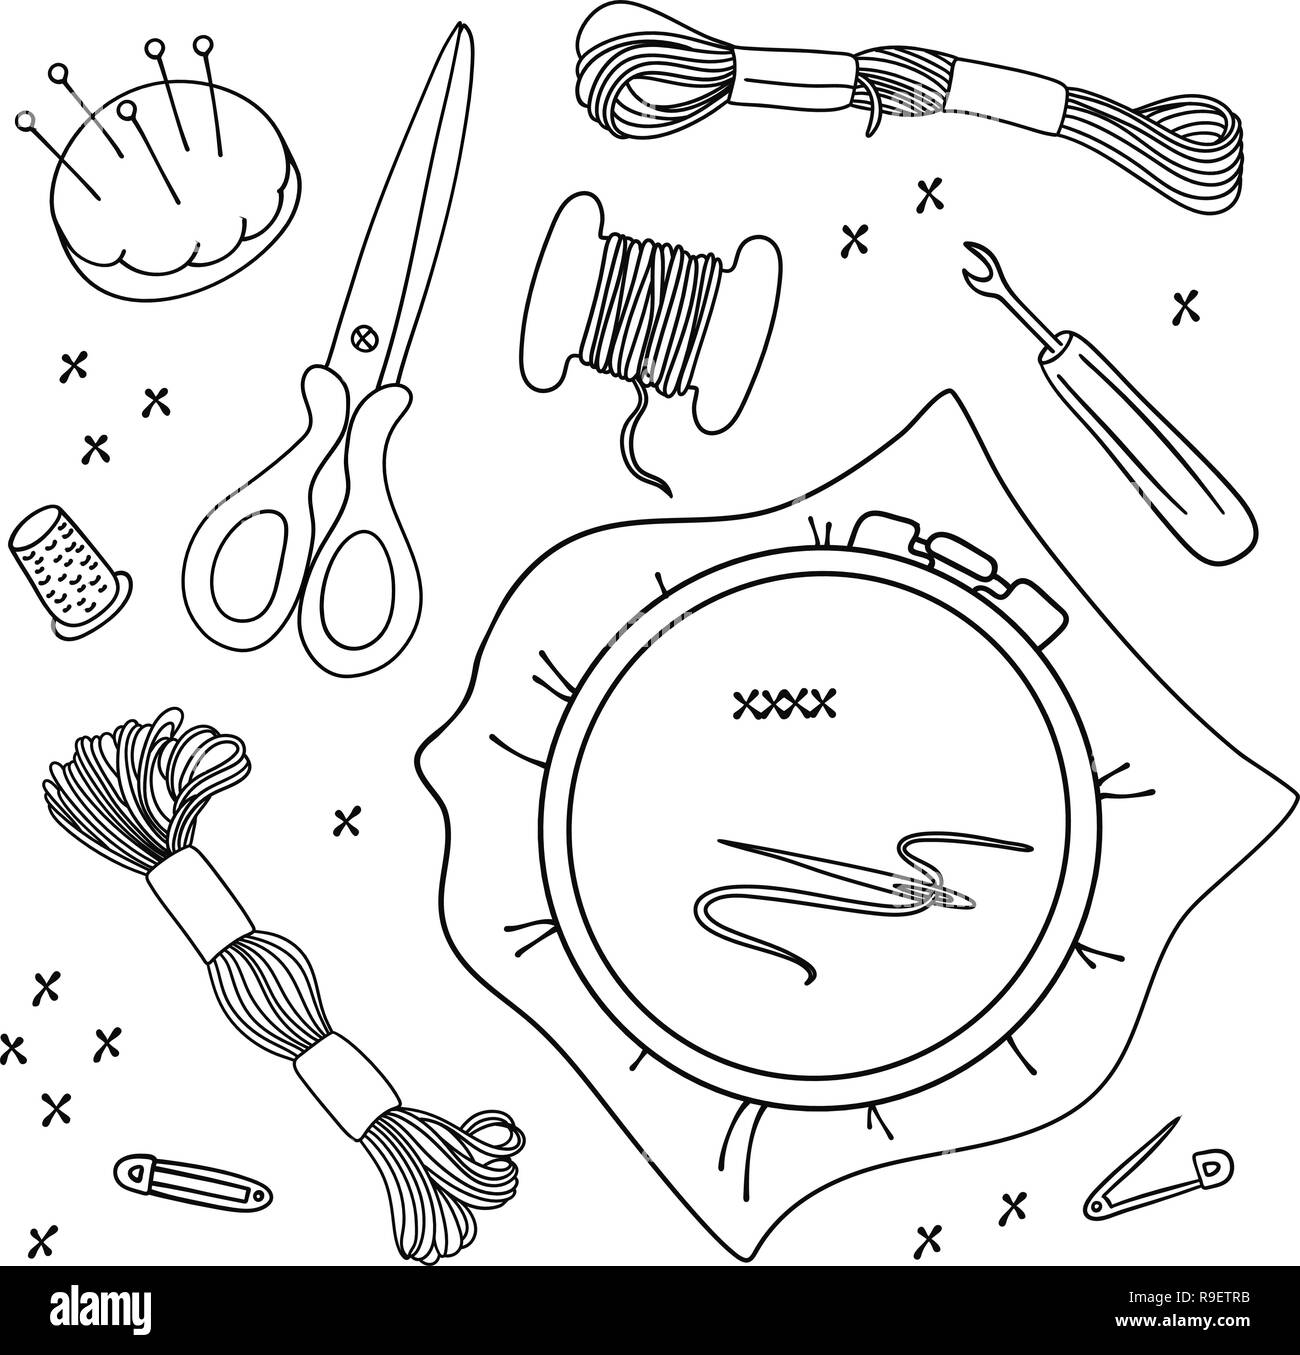 Embroidery Tools Vector Illustration Set For Sewing And Embroidery Wall Decorations Scrapbooking Baby Book Photo Albums And Card Print Stock Vector Image Art Alamy